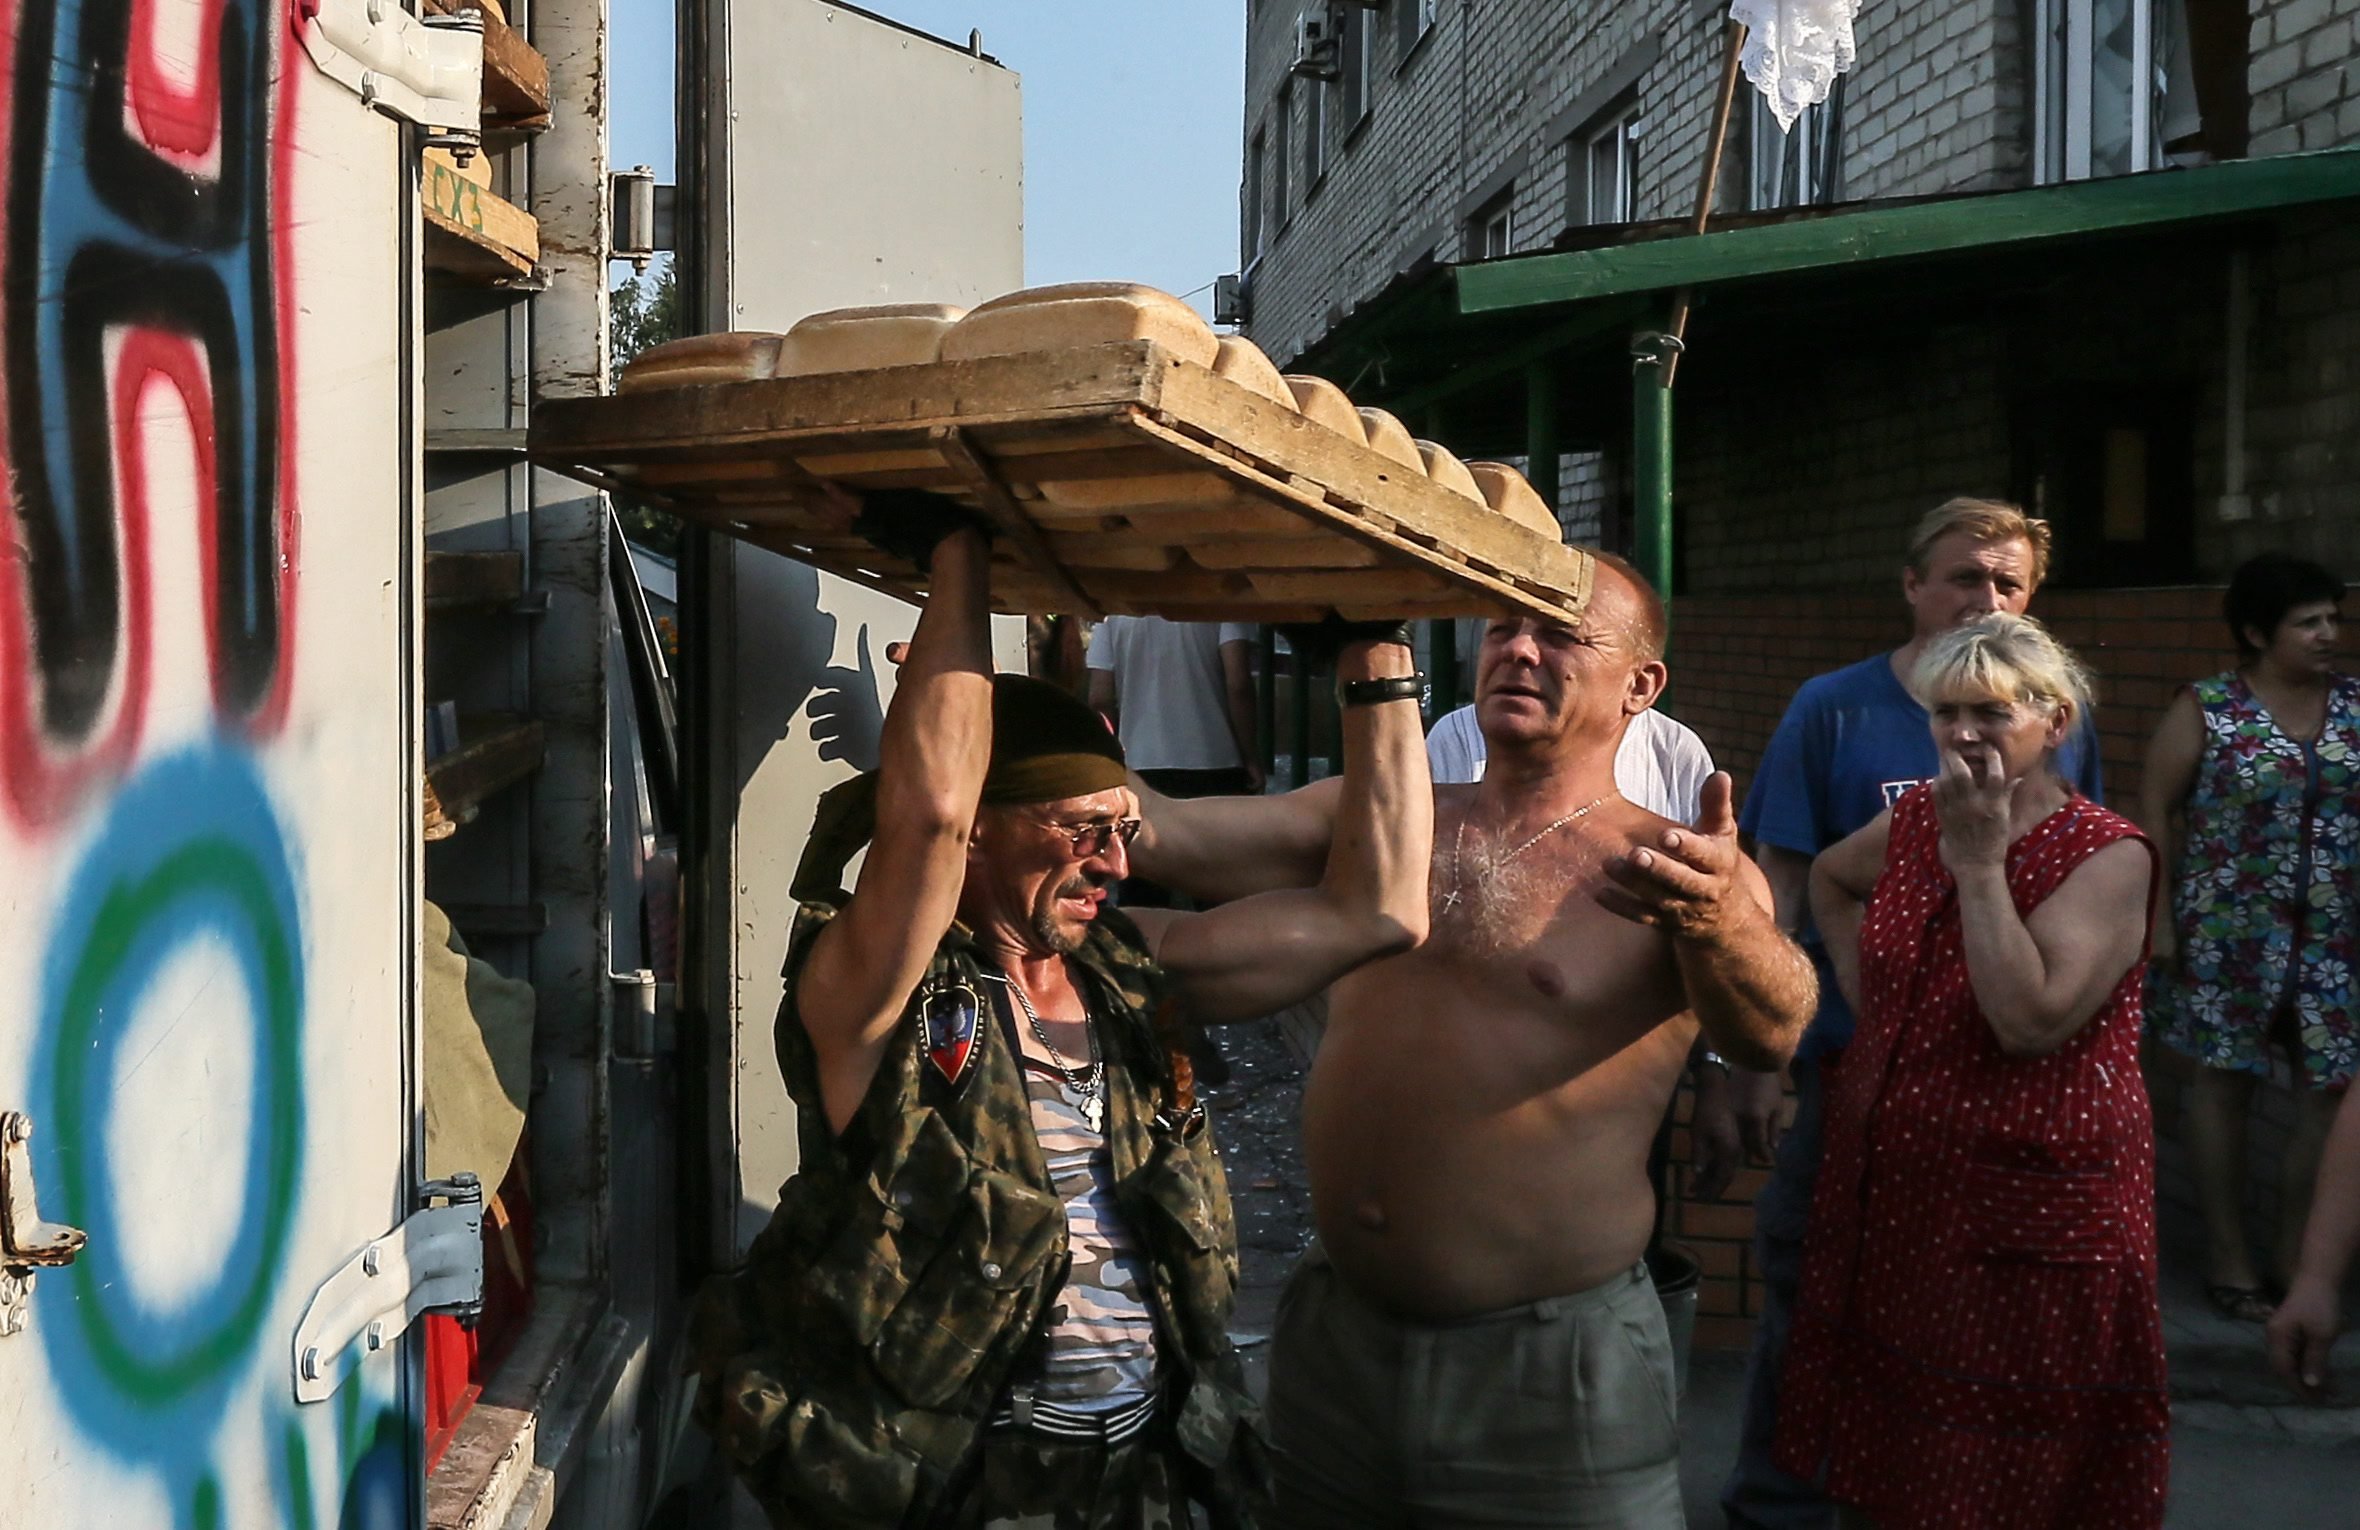 Member of the Donetsk People's Republic militias carry trays with bread for locals hiding in shelters in Ilovaysk 50km from Donetsk, Ukraine on August 14, 2014.